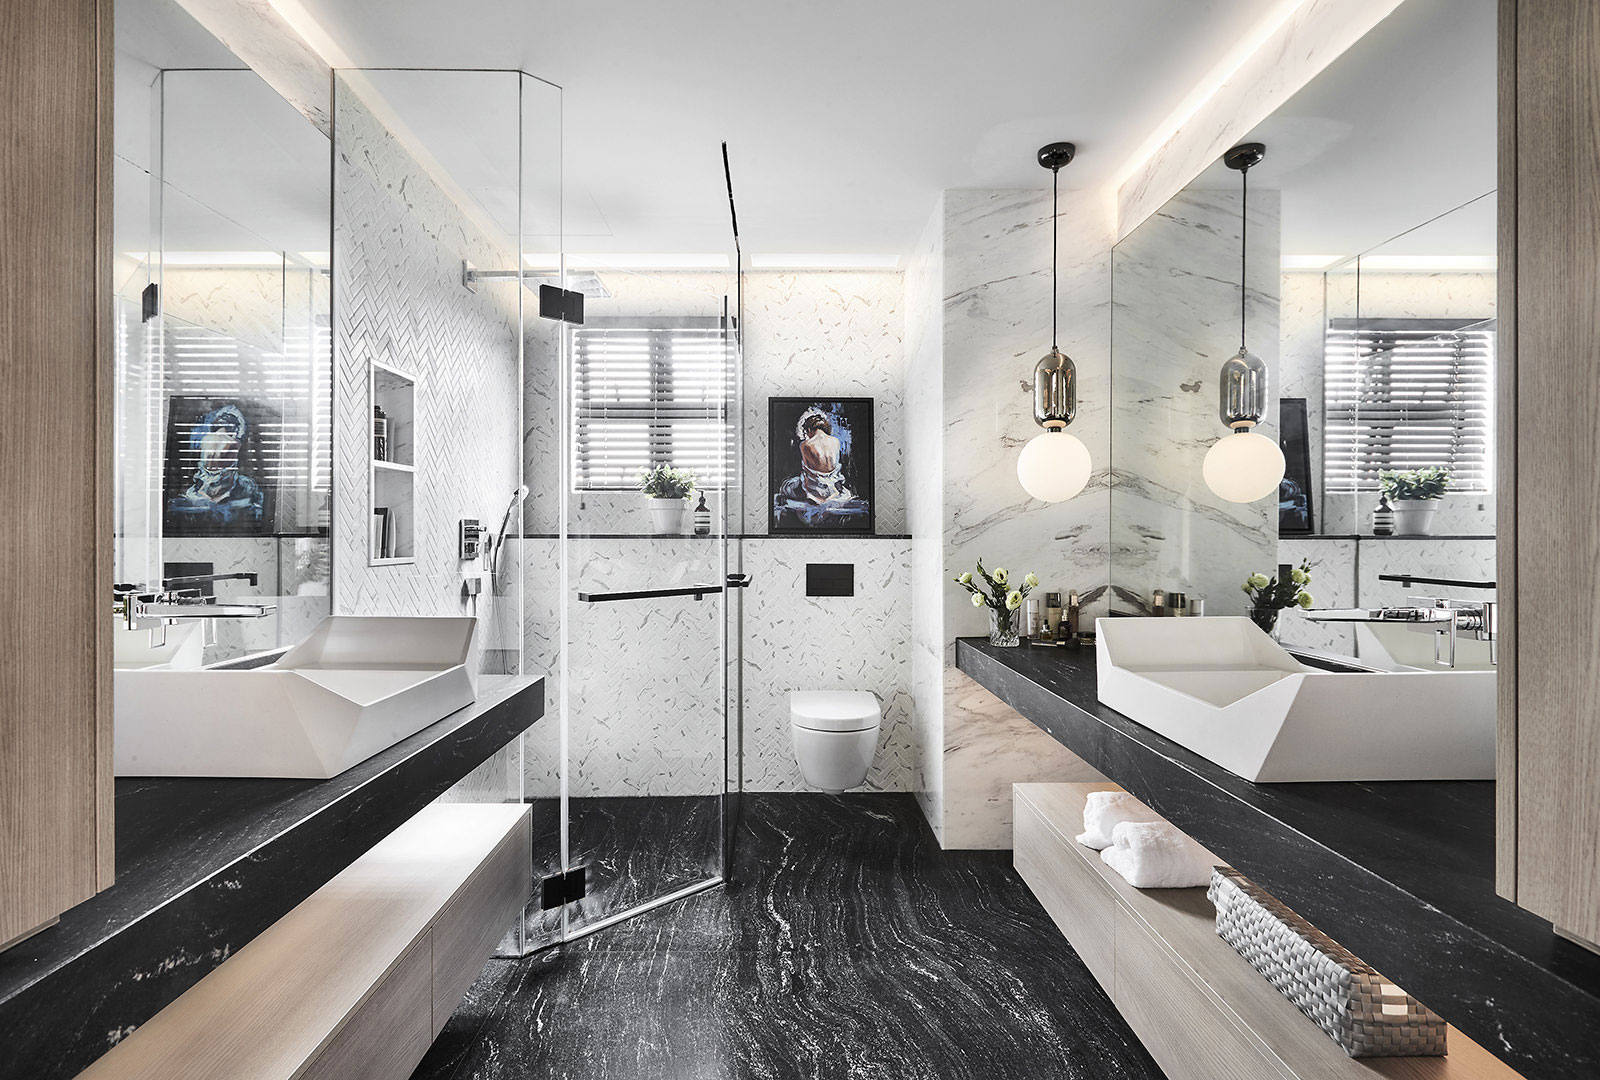 A modern bathroom with black and white marble floors.